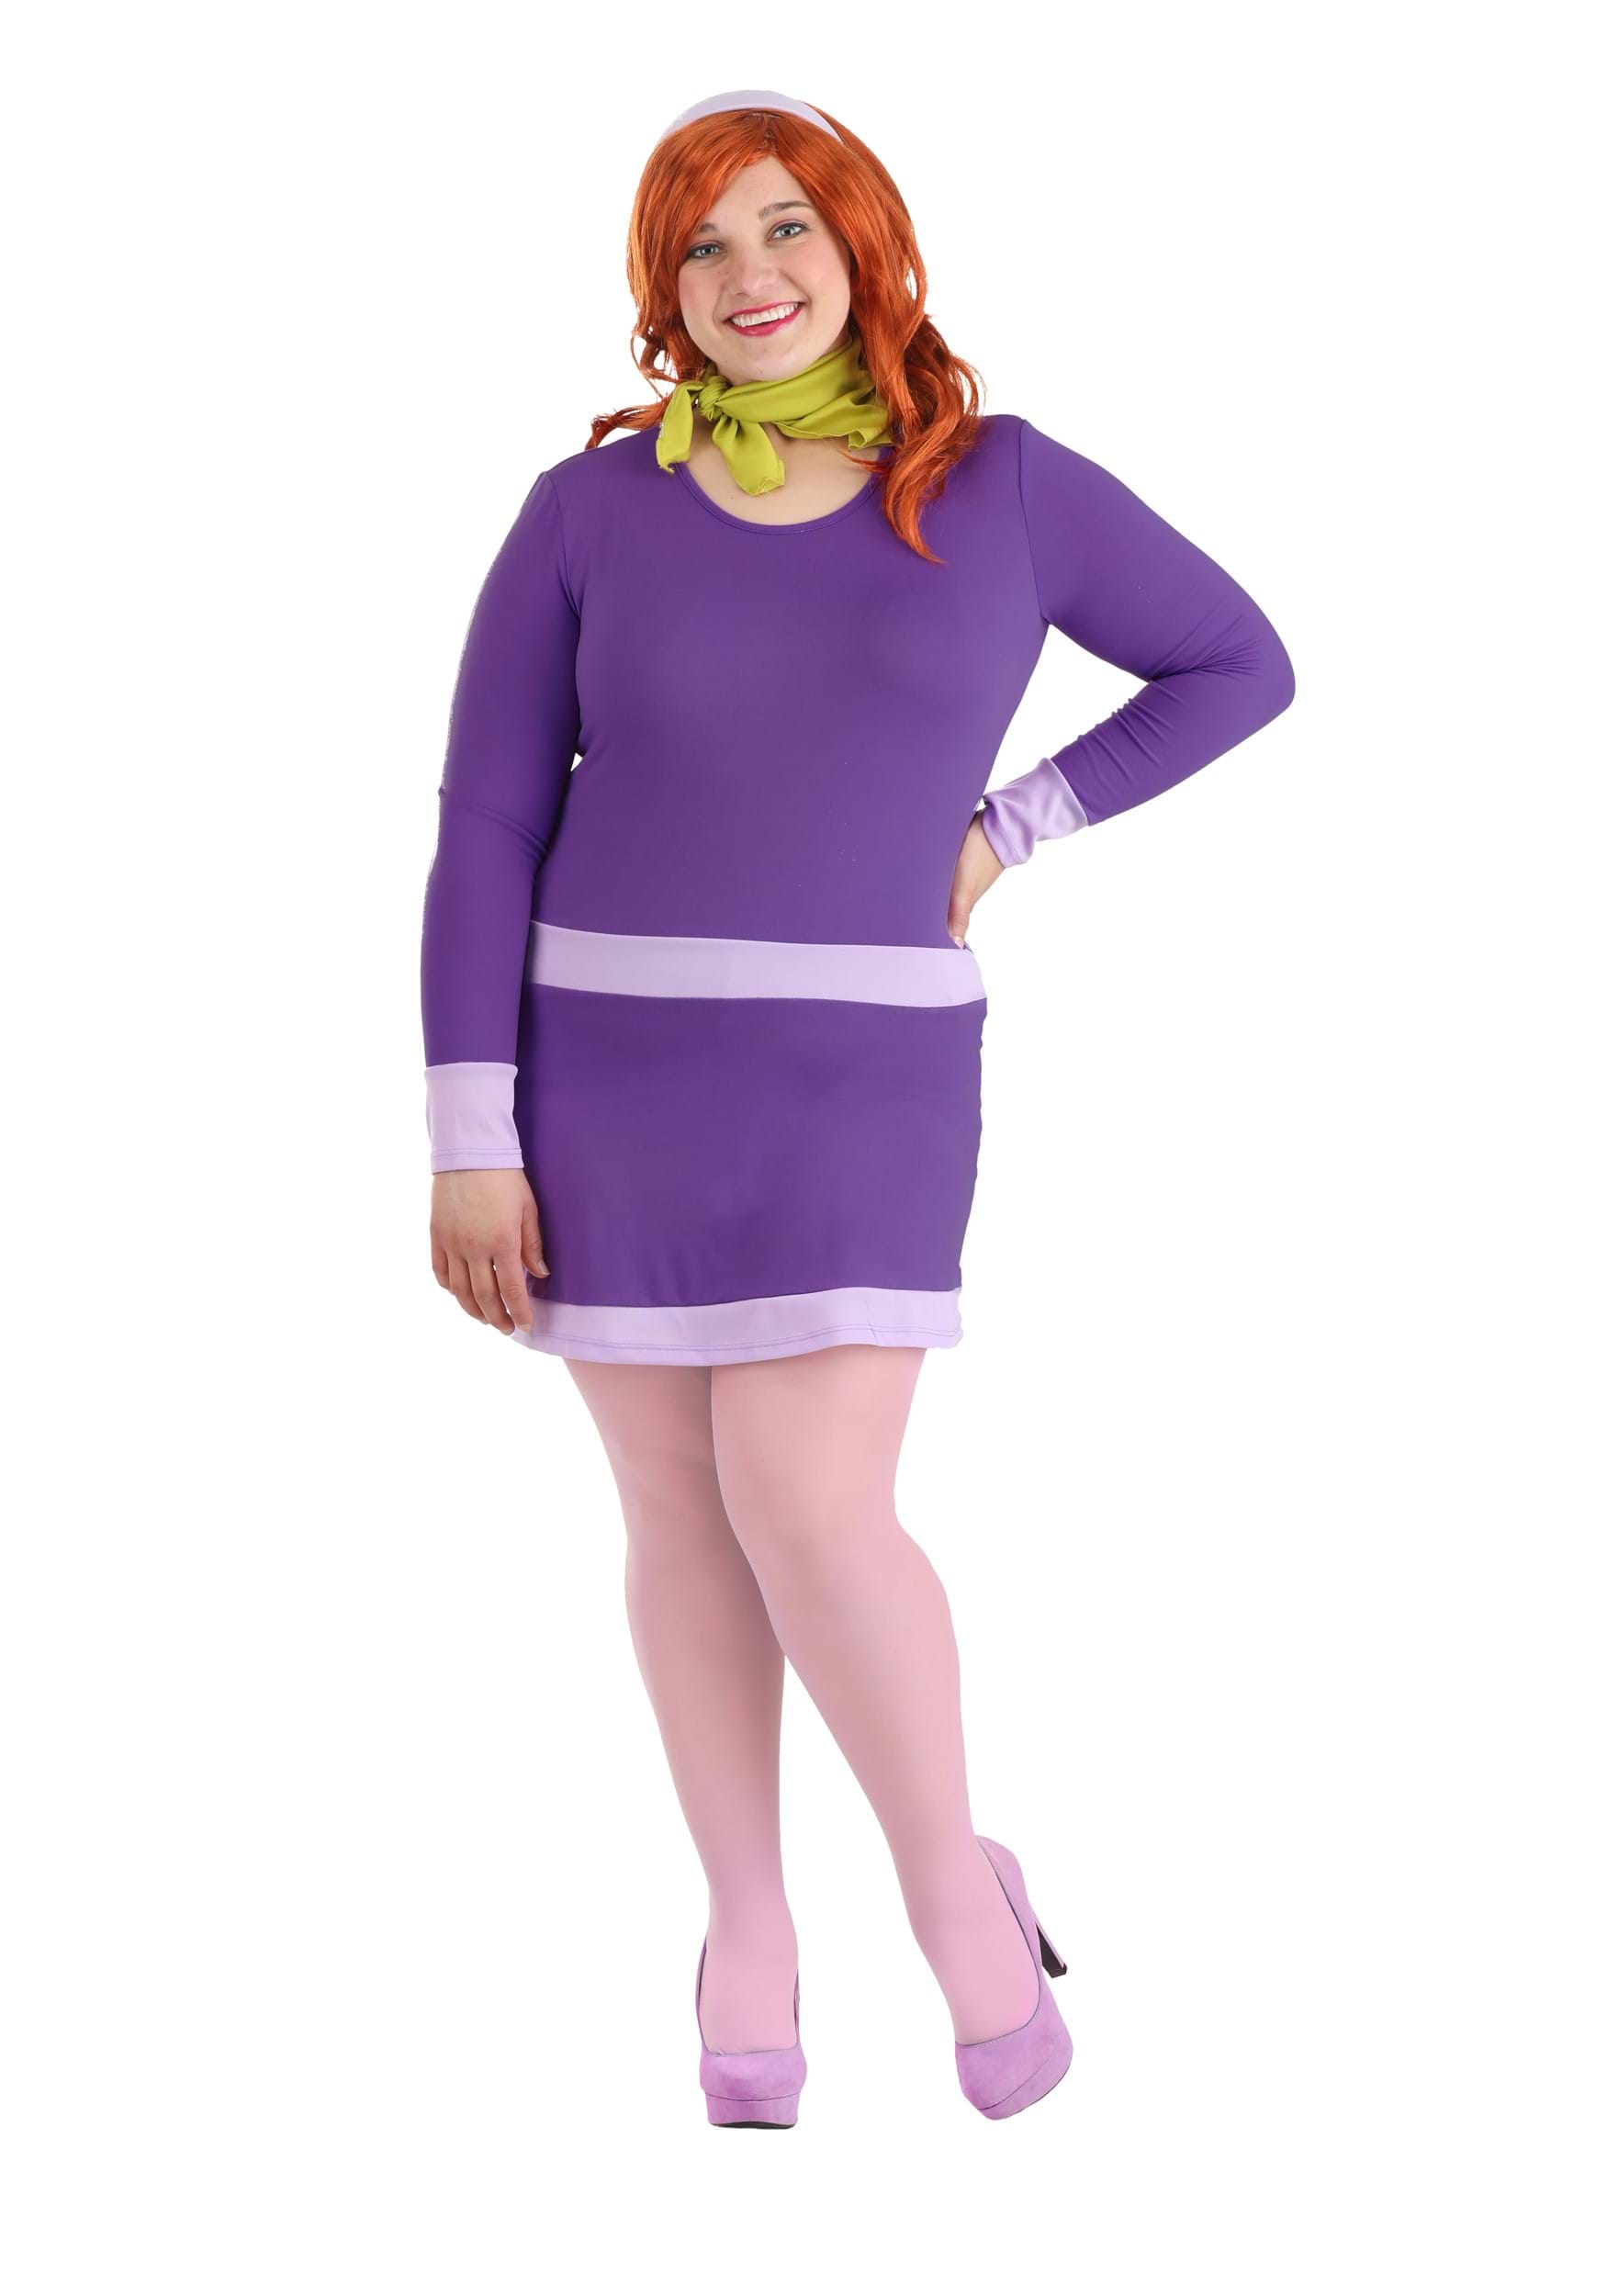 daphne and fred costume